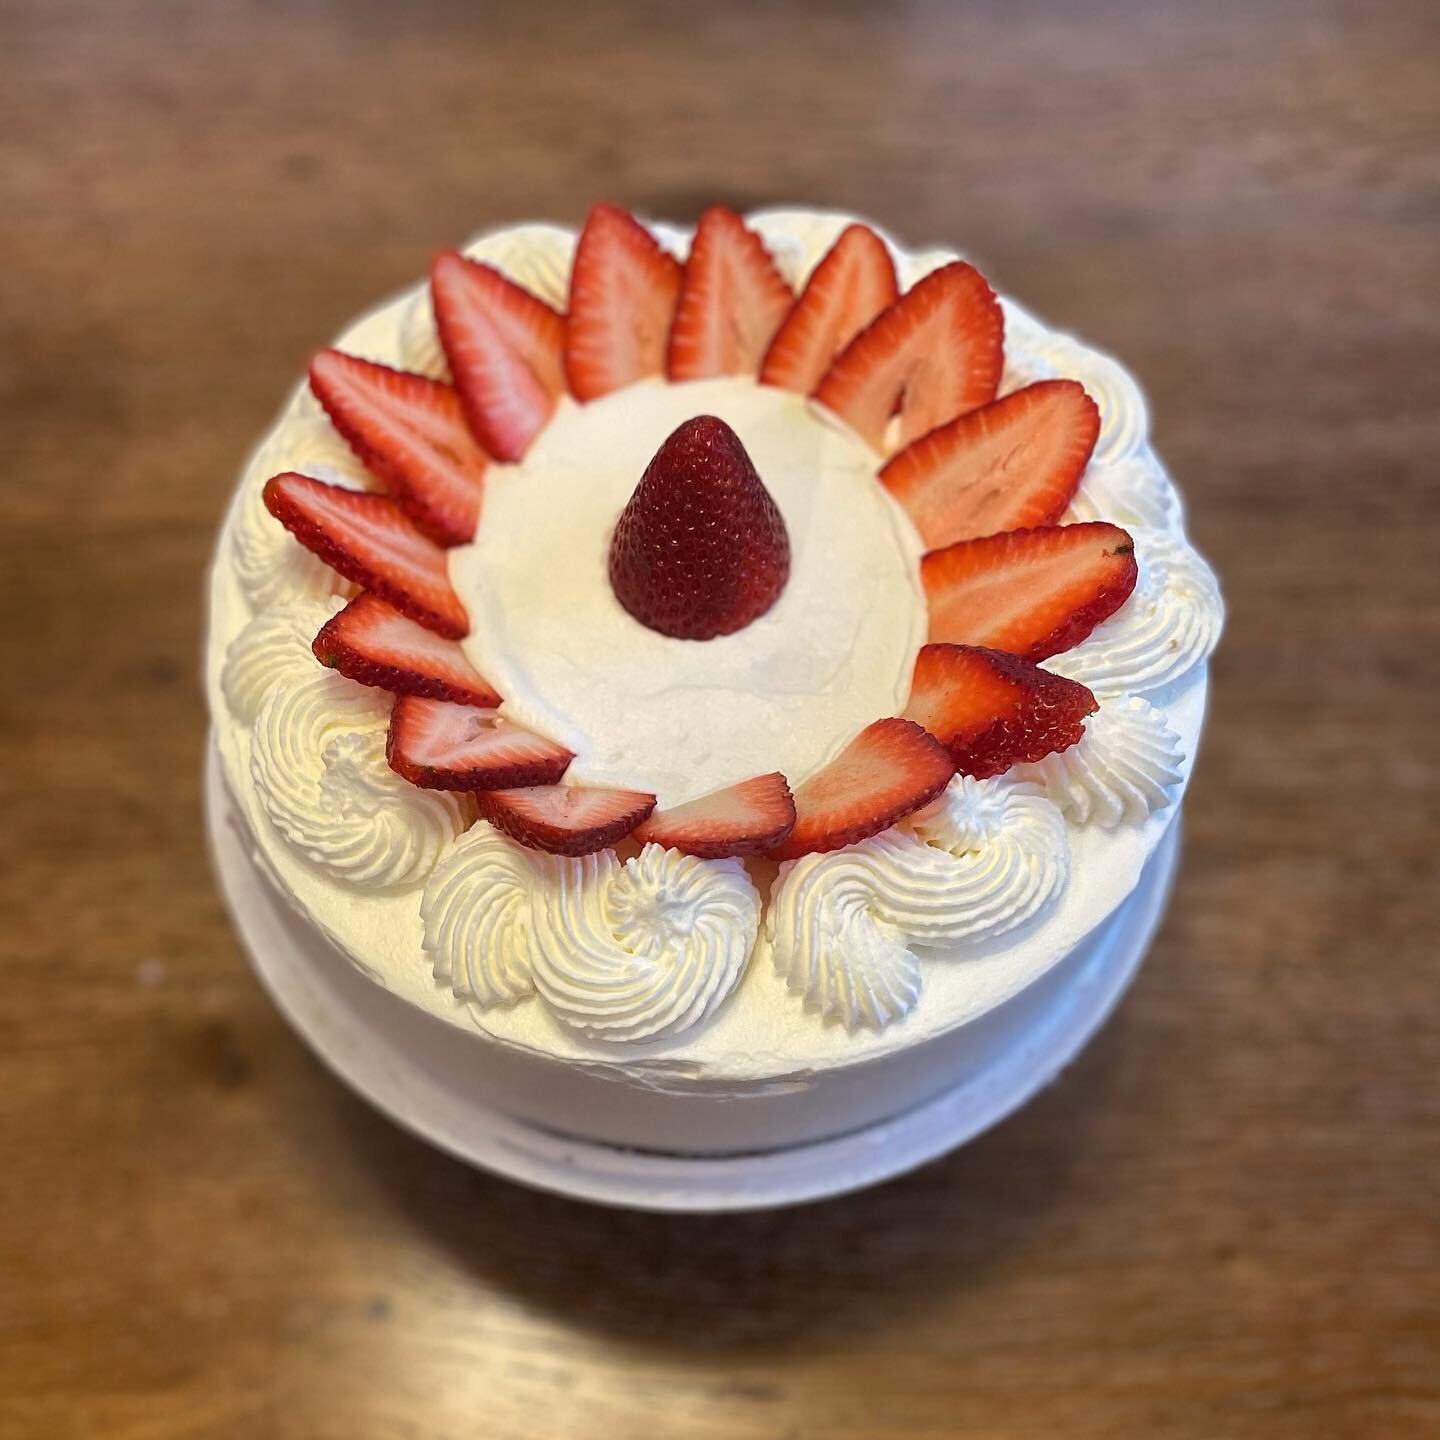 Strawberry layered birthday cake 🎂 custom cakes available, message me!

Checkout our website:
Topknotartisanbakery.com 

#homebakery #delicious #sweet #cake #chocolate #homemade #foodstagram #foodphotography #smallbusiness #dessert #foodlover #bakin